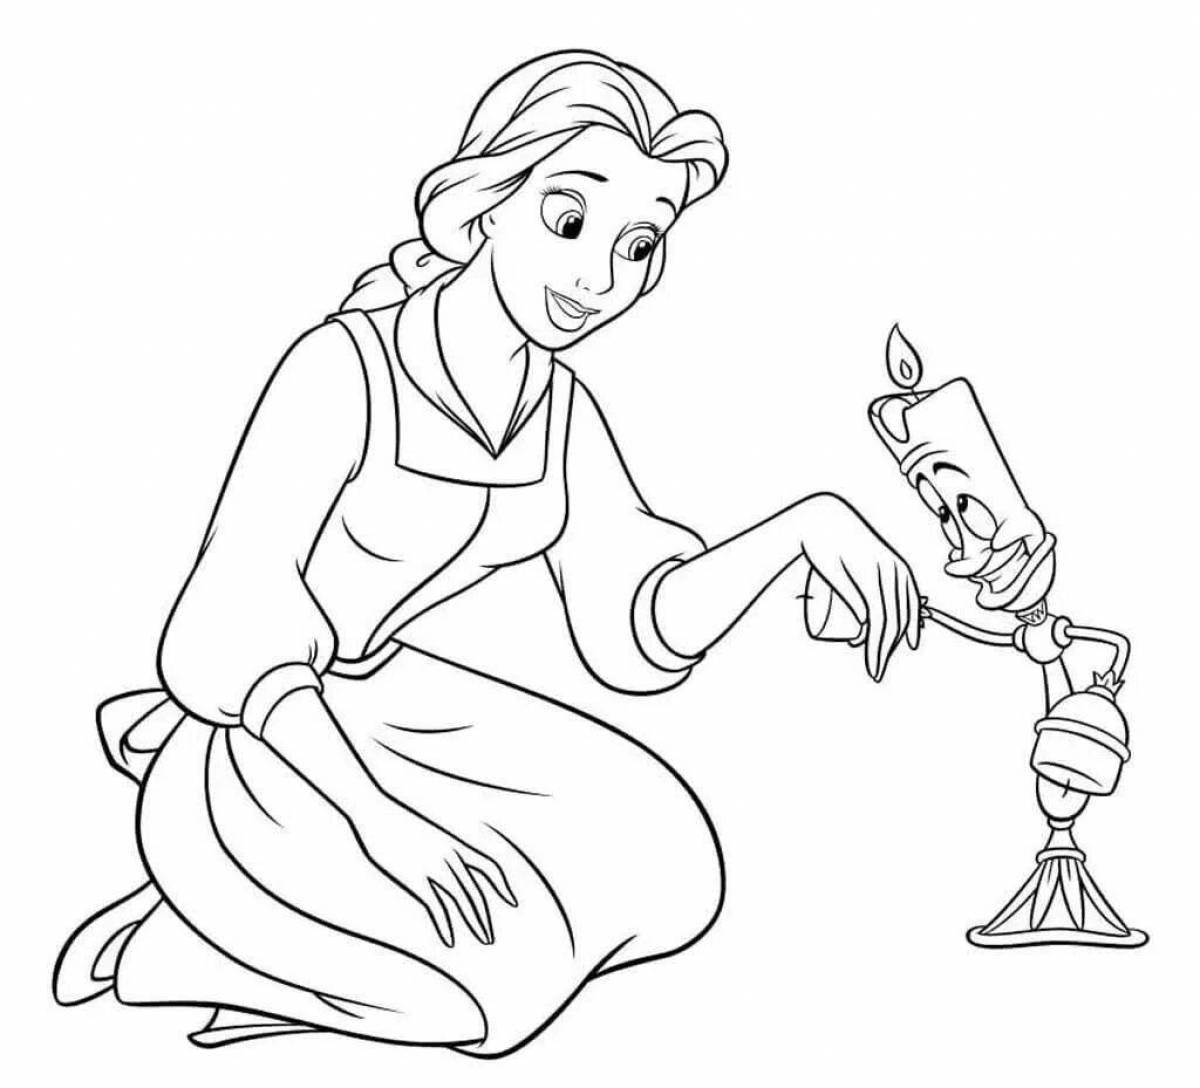 Brilliant belle and the monster coloring book